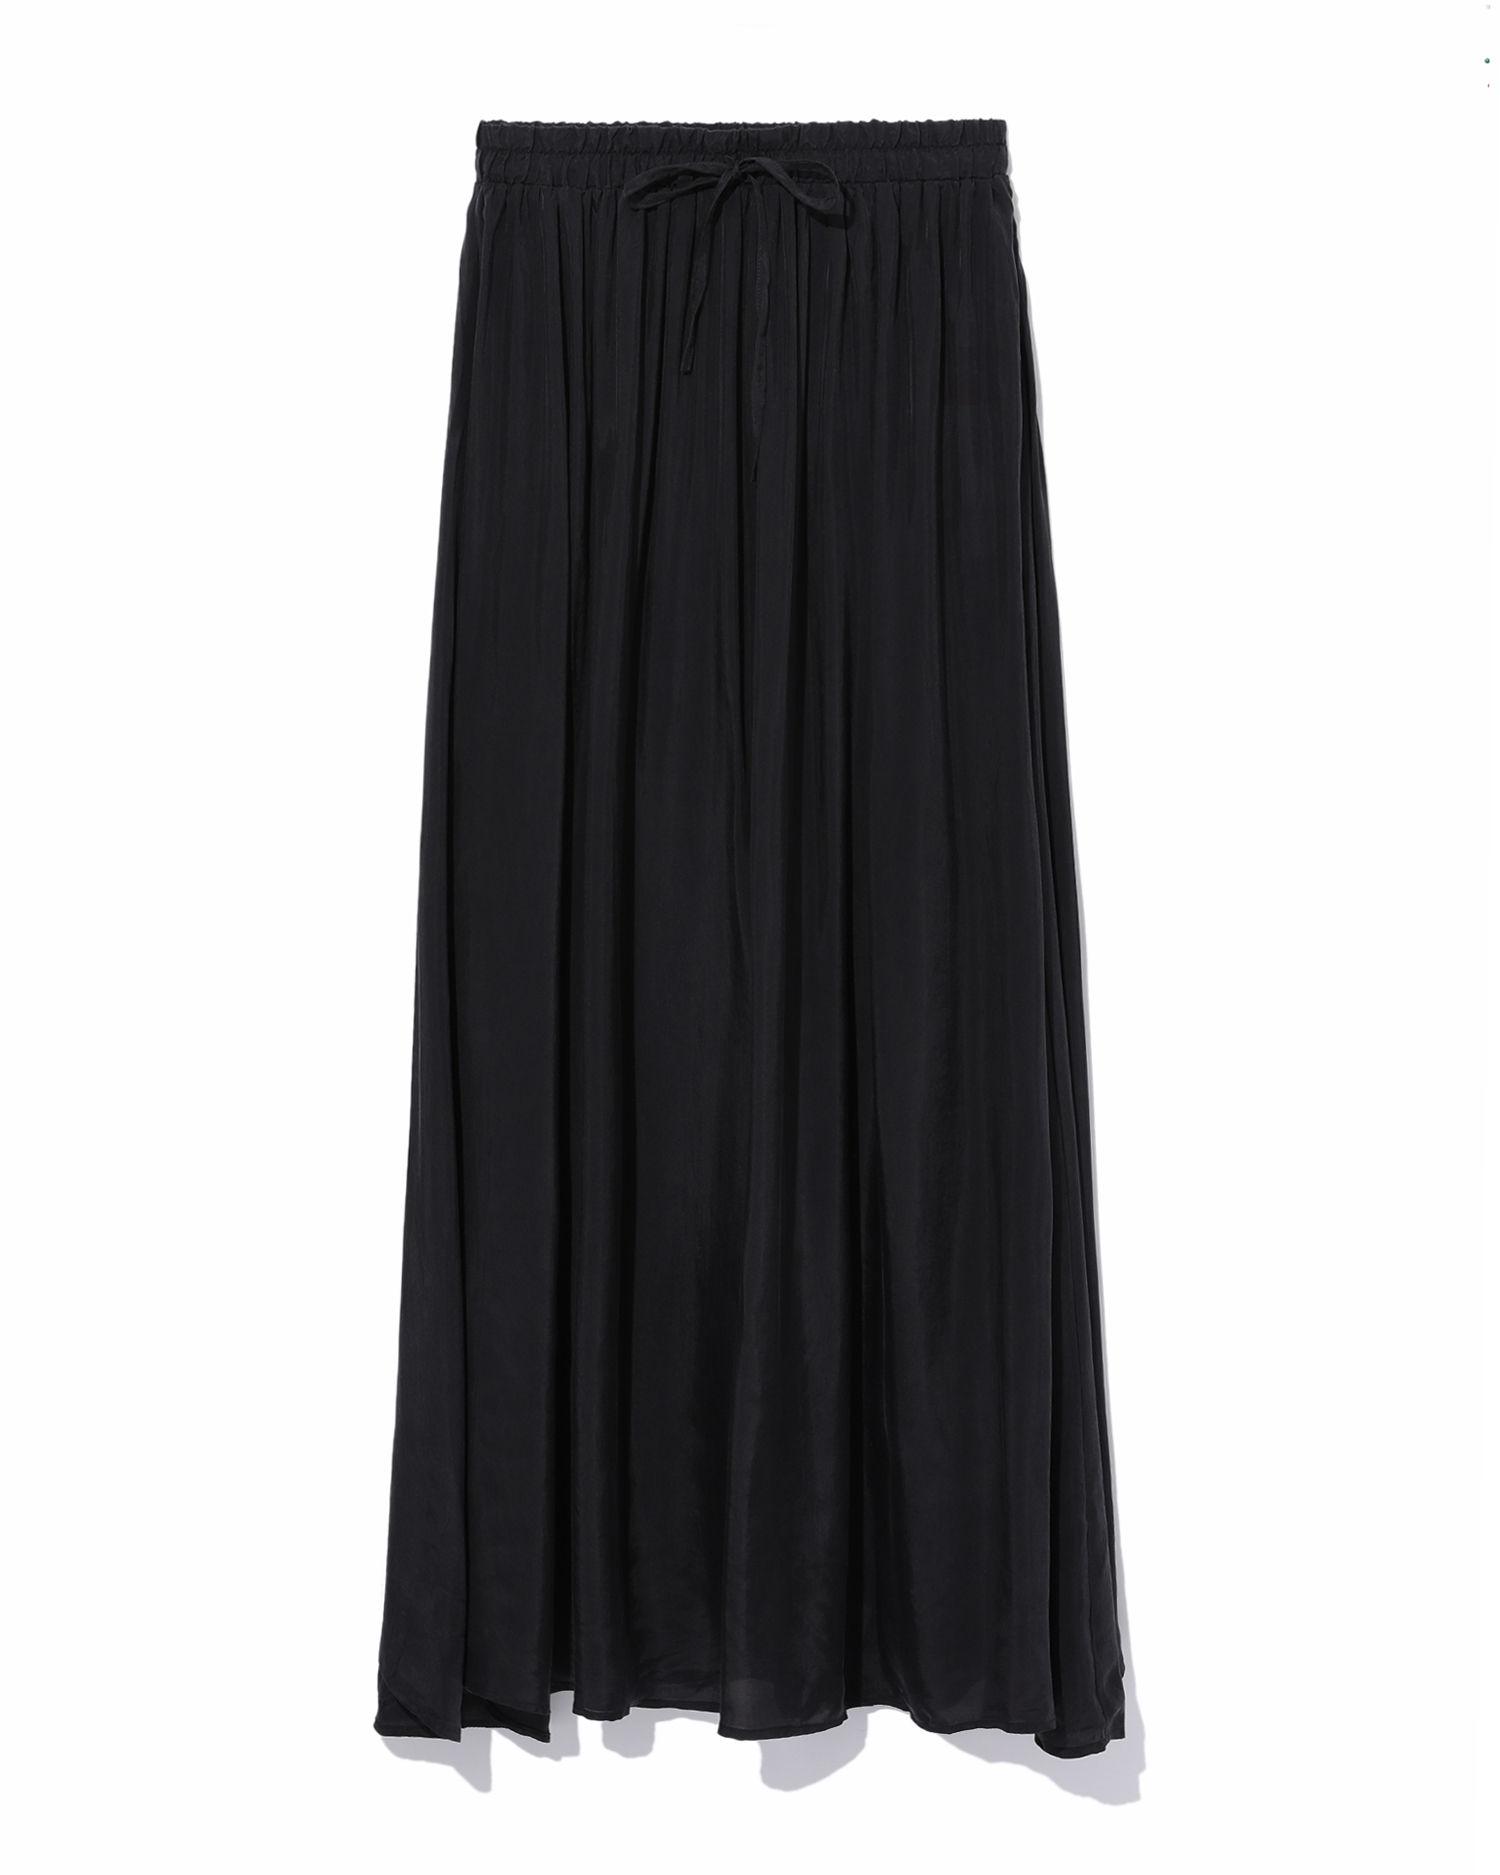 Pleated skirt by GARAGE OF GOOD CLOTHING